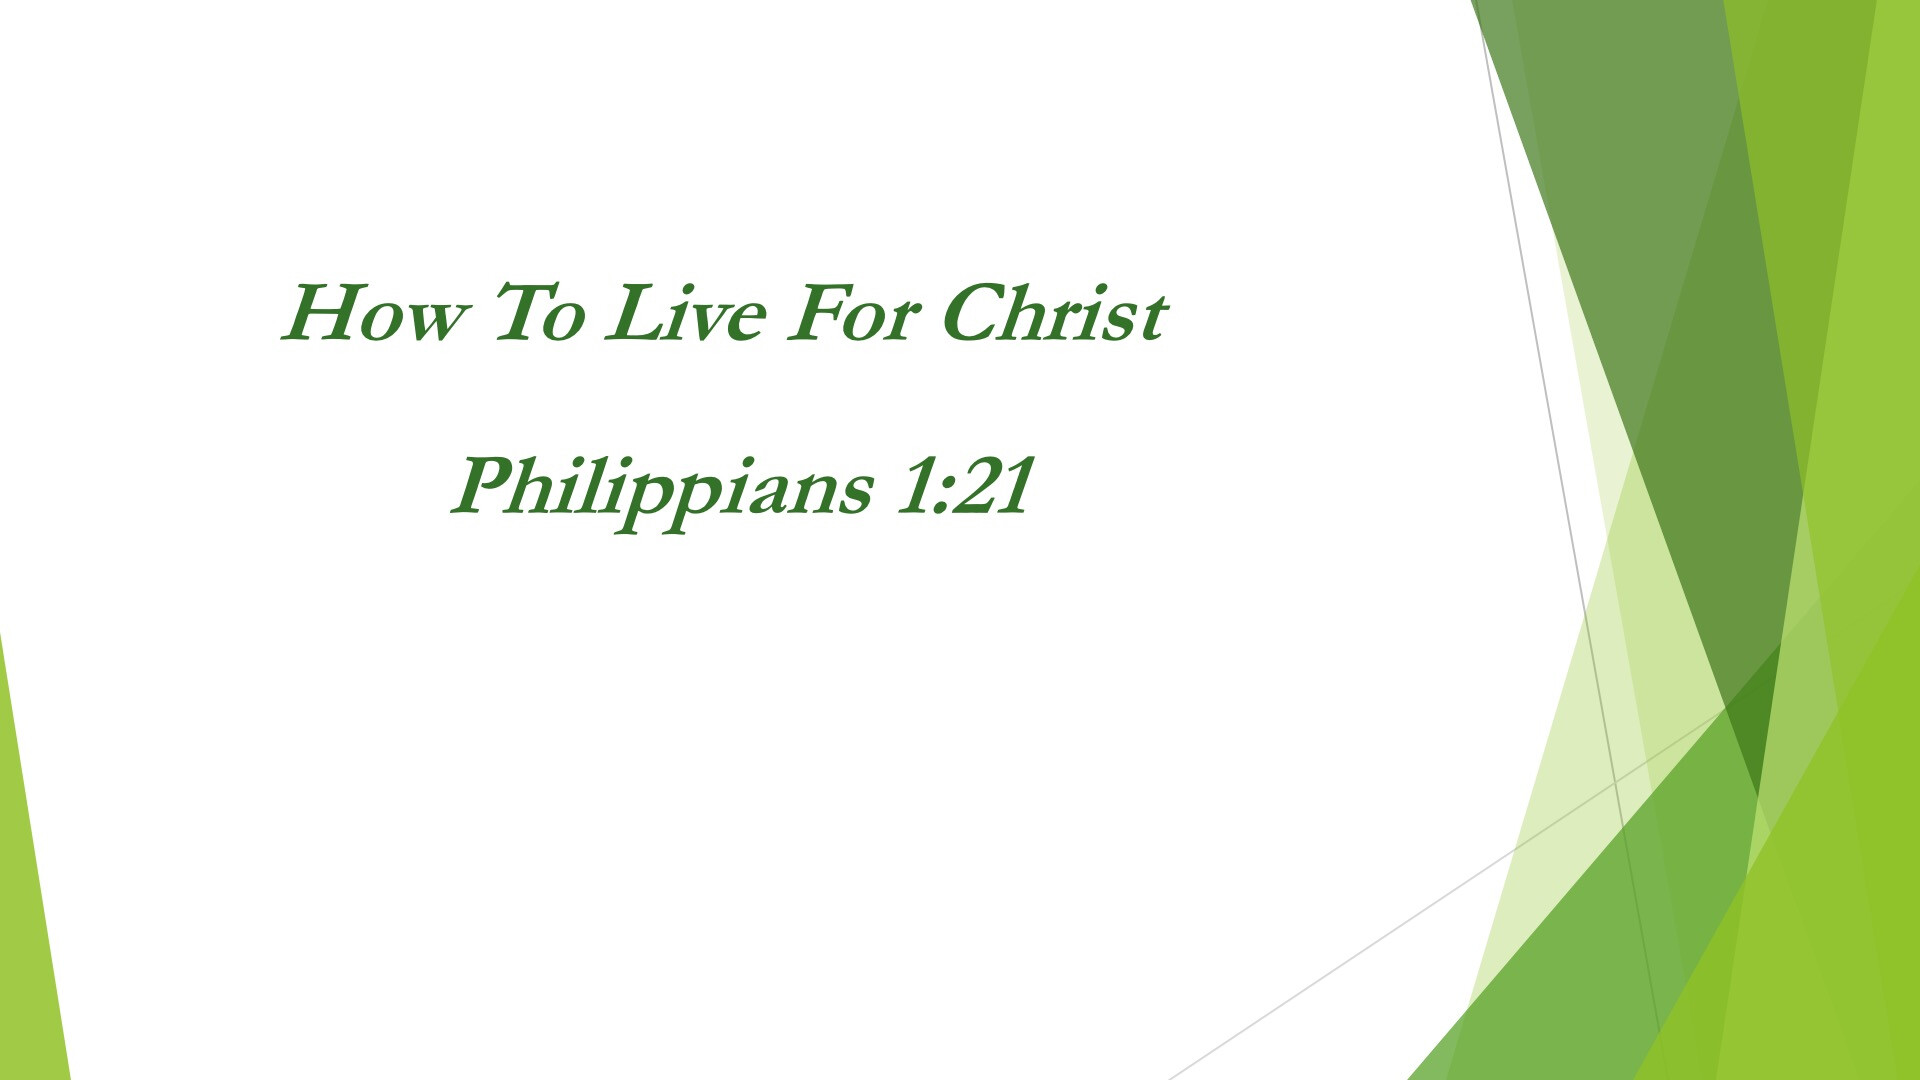 How to Live for Christ